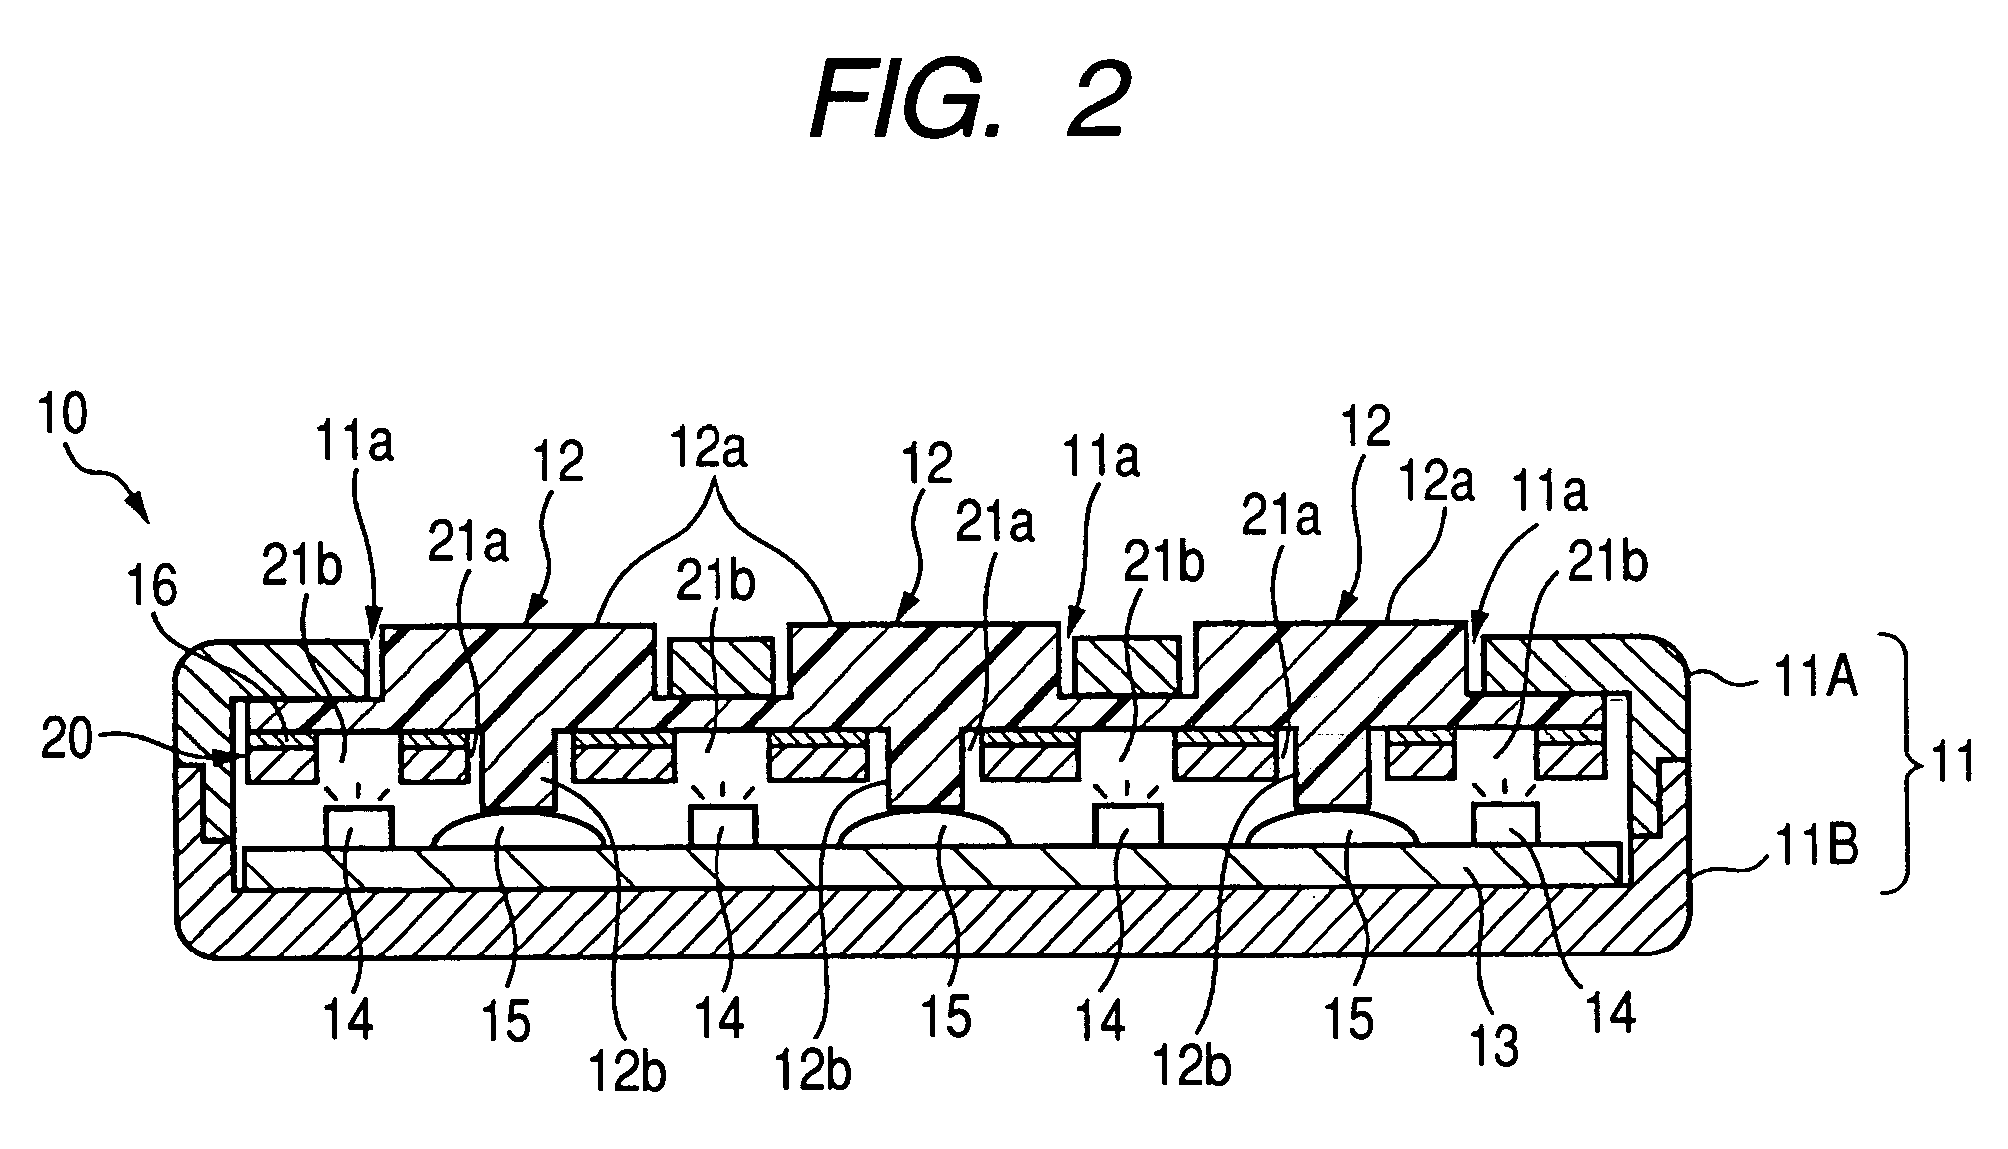 Capacitive coordinate detection device